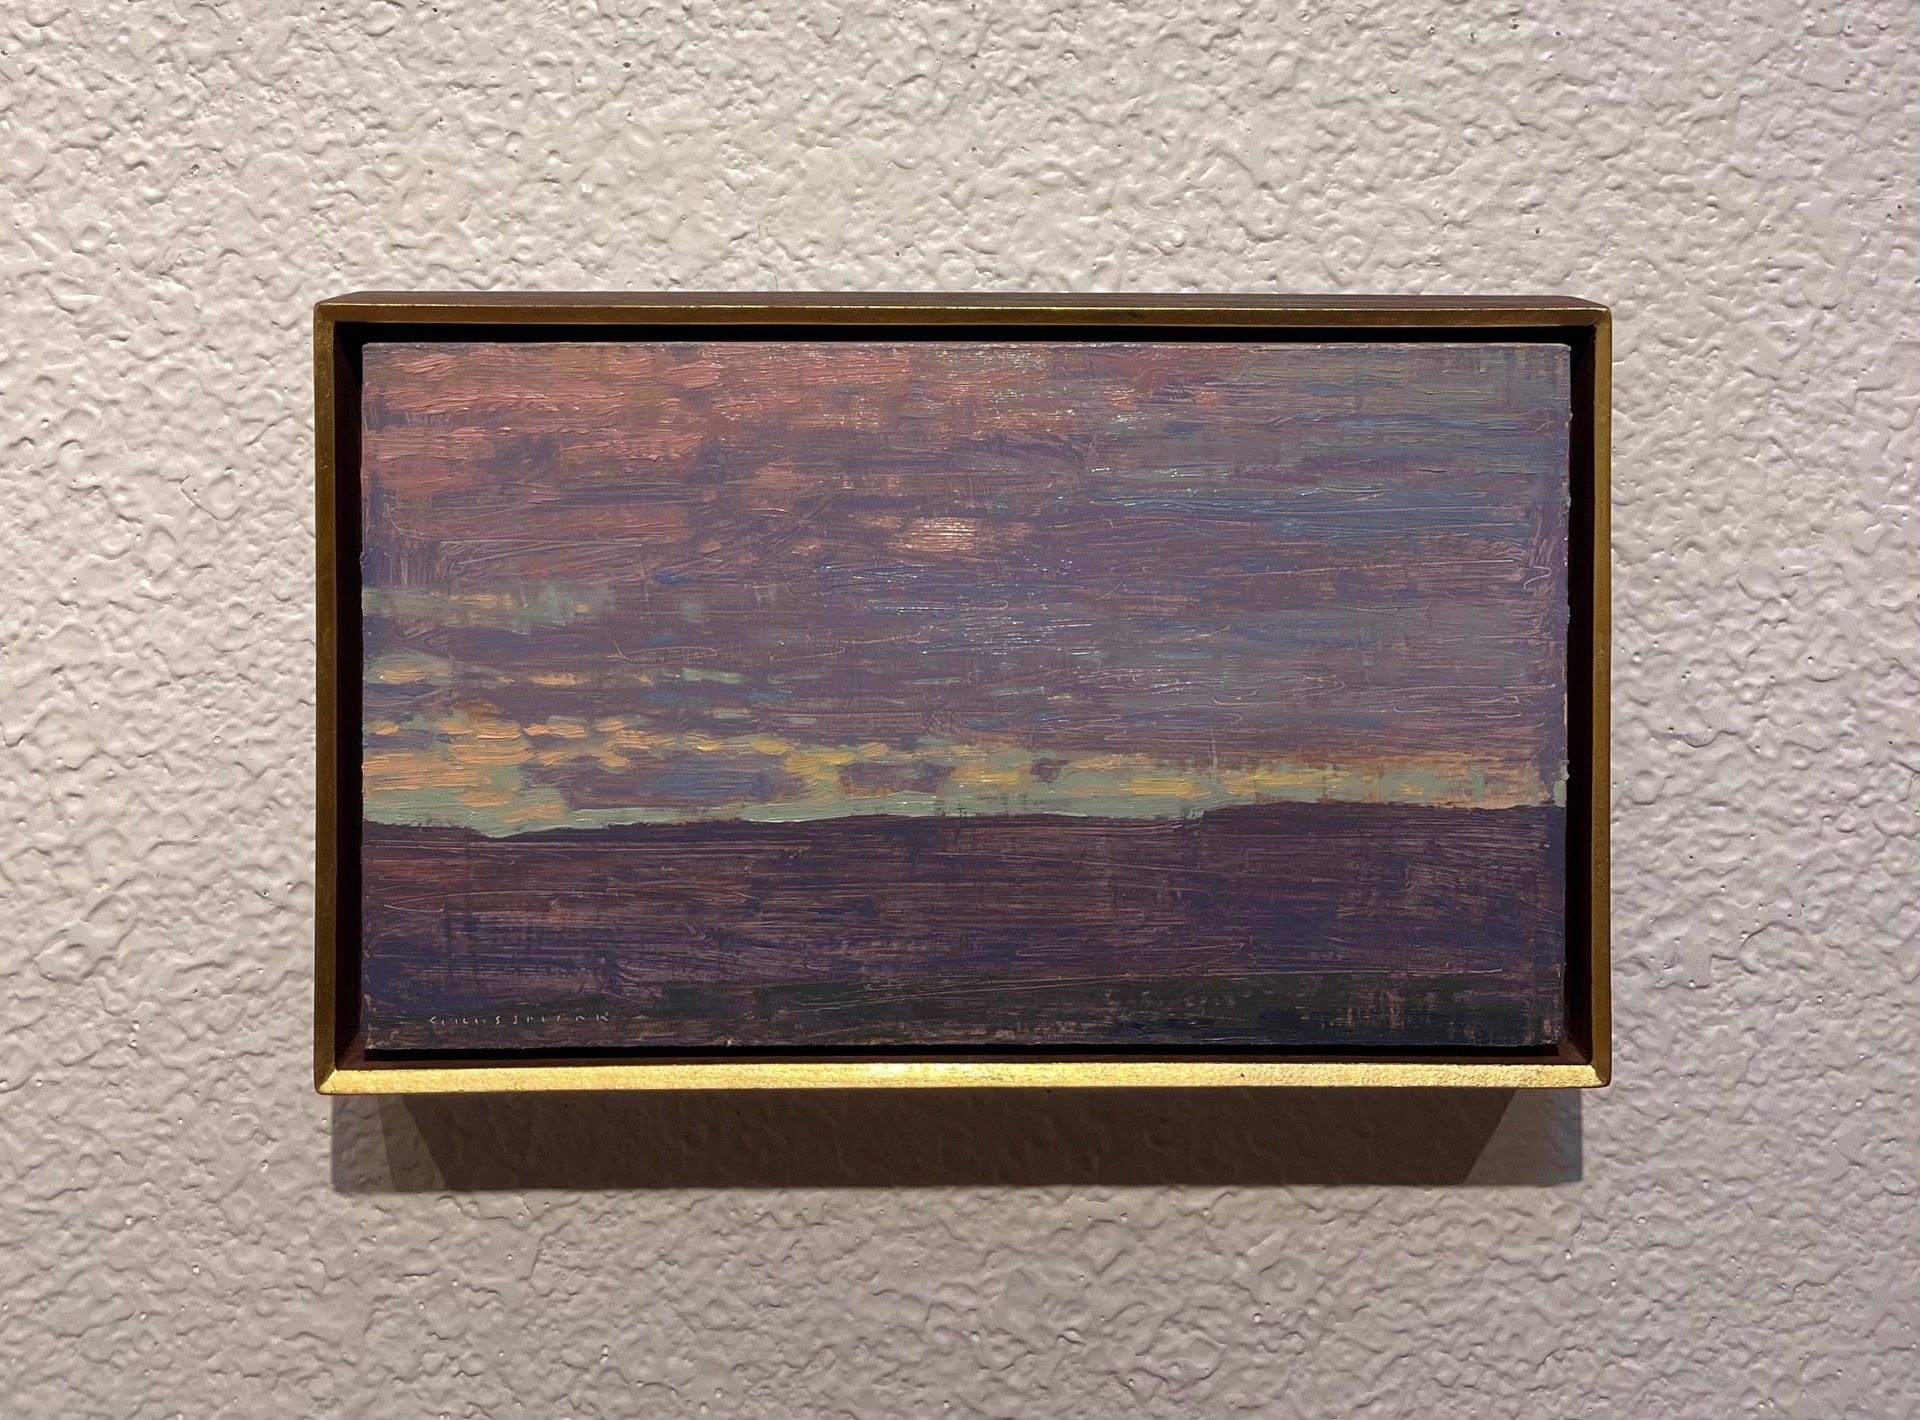 Evening View to the South West by David Grossmann